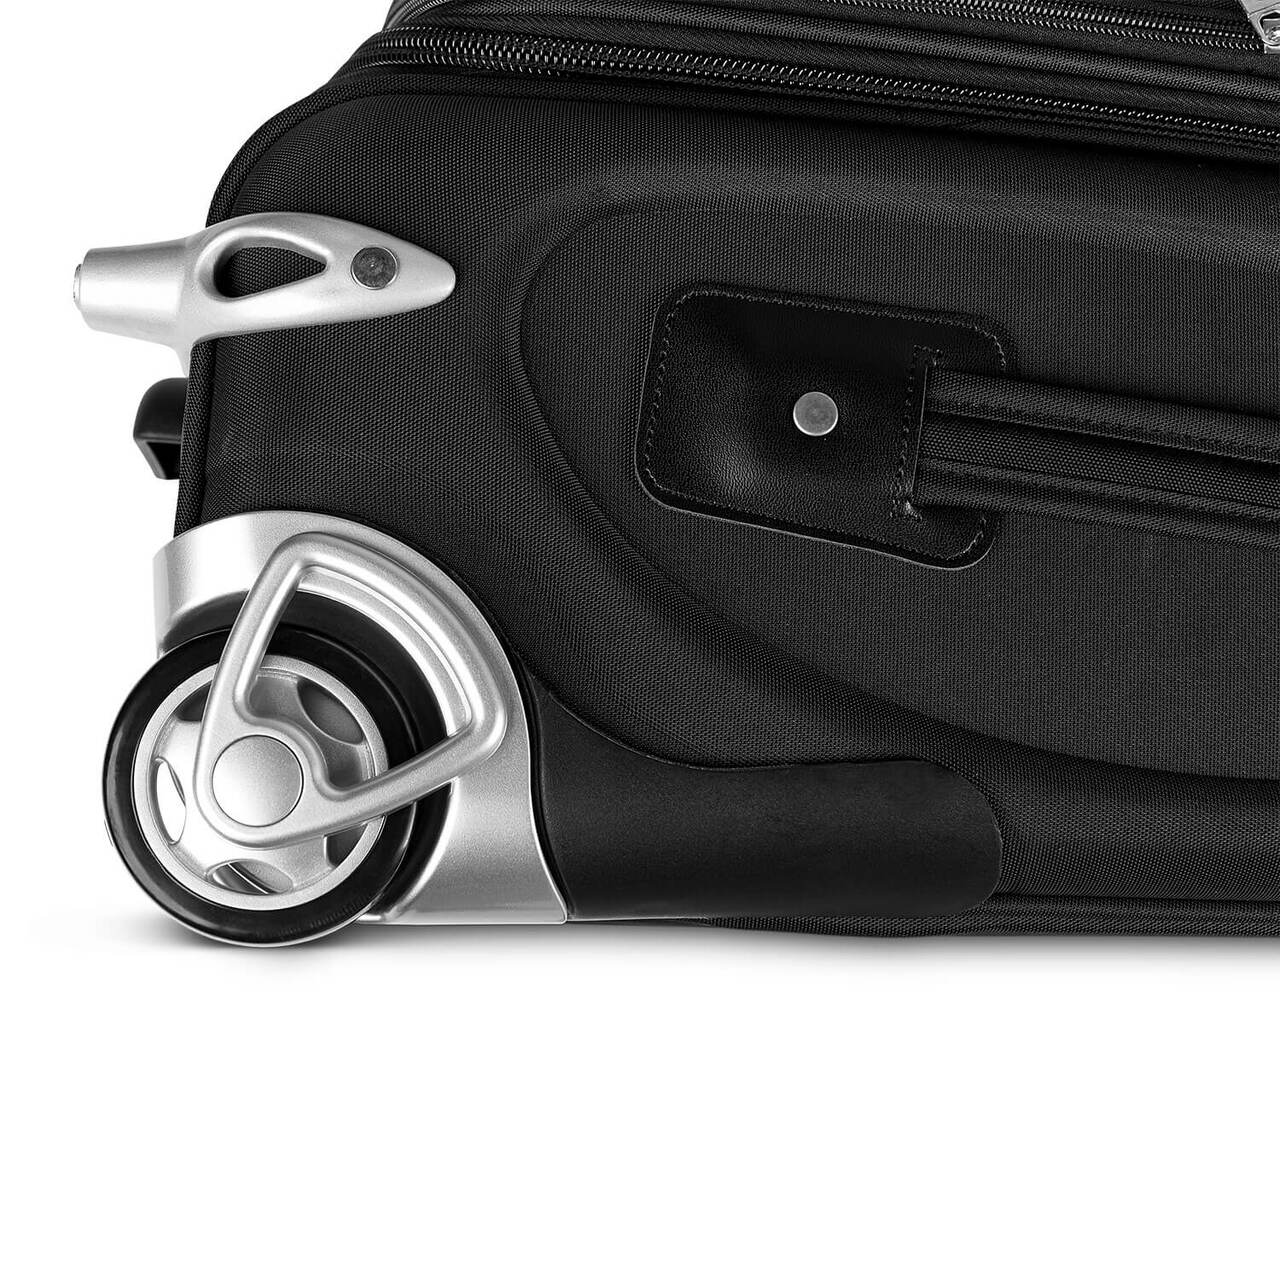 Waves Carry On Luggage | Pepperdine University Waves Rolling Carry On Luggage